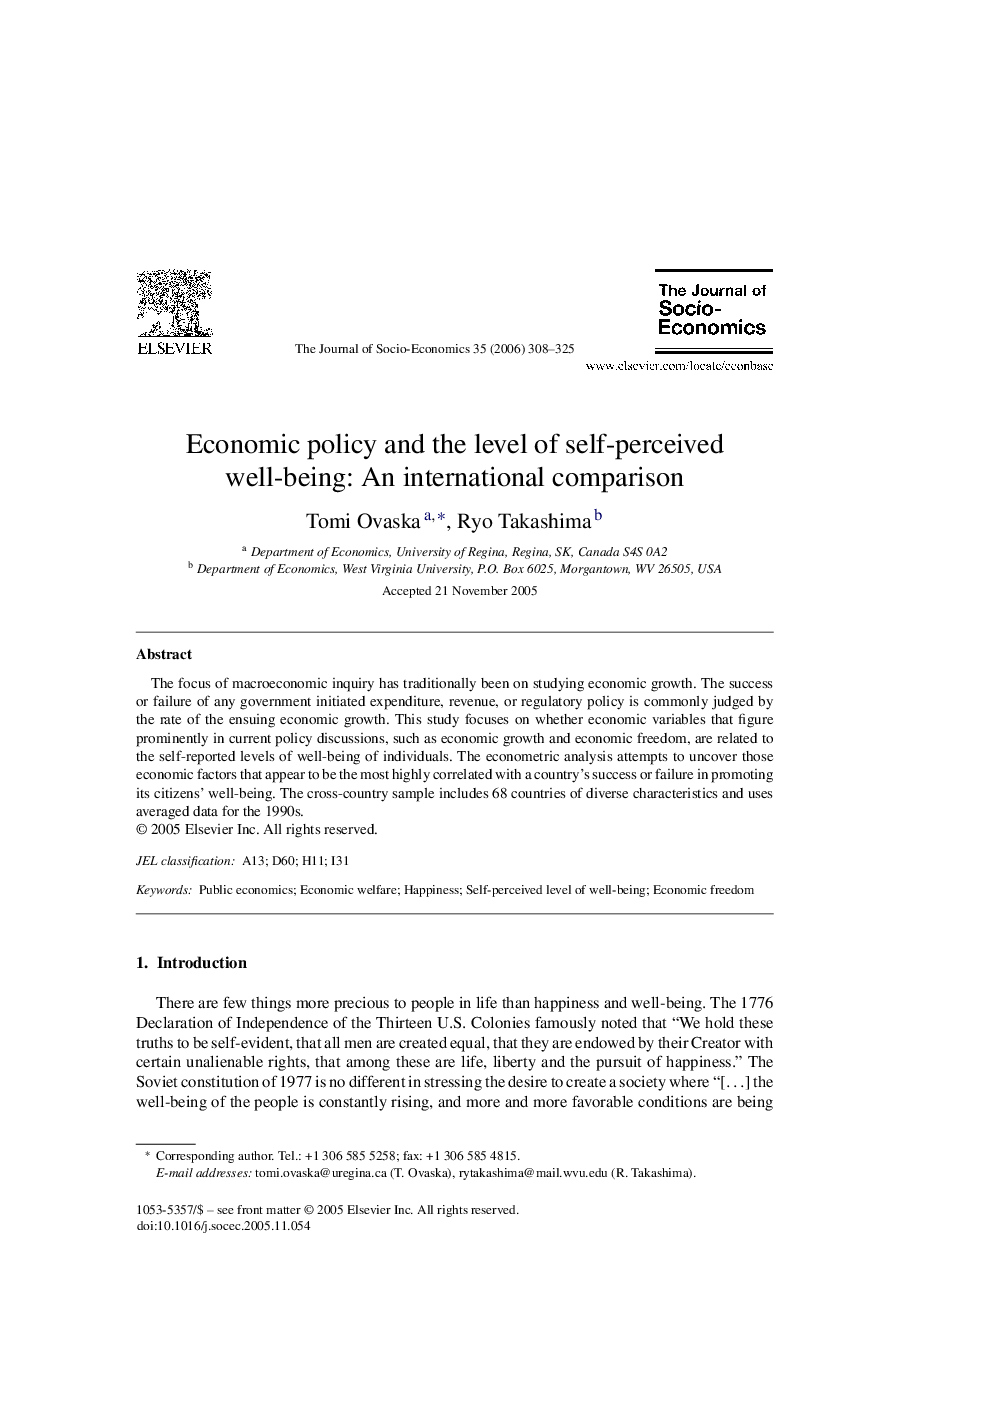 Economic policy and the level of self-perceived well-being: An international comparison